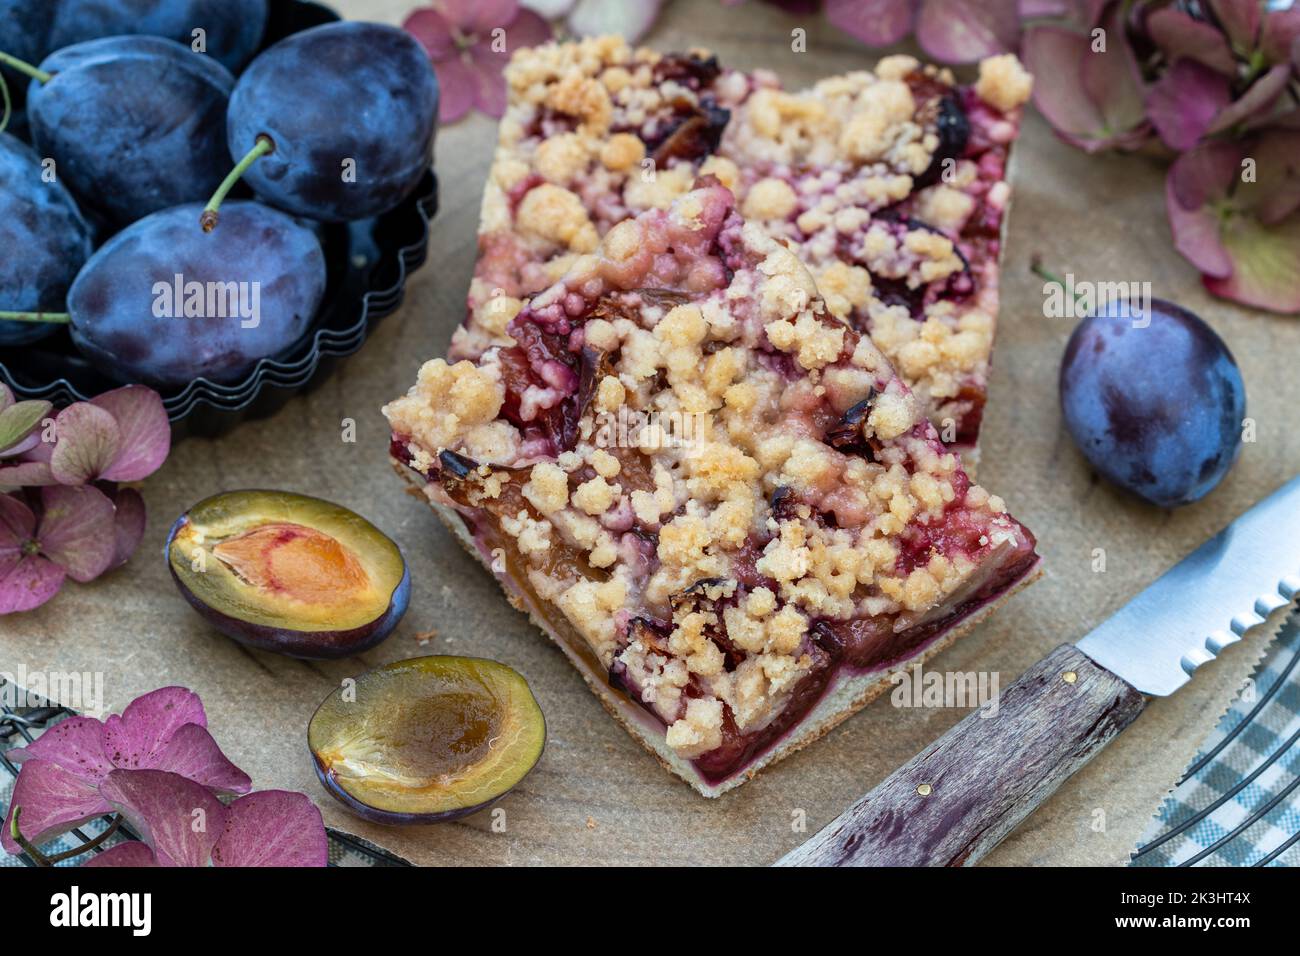 plum cake with yeast dough and crumbles,  German plum cake Stock Photo